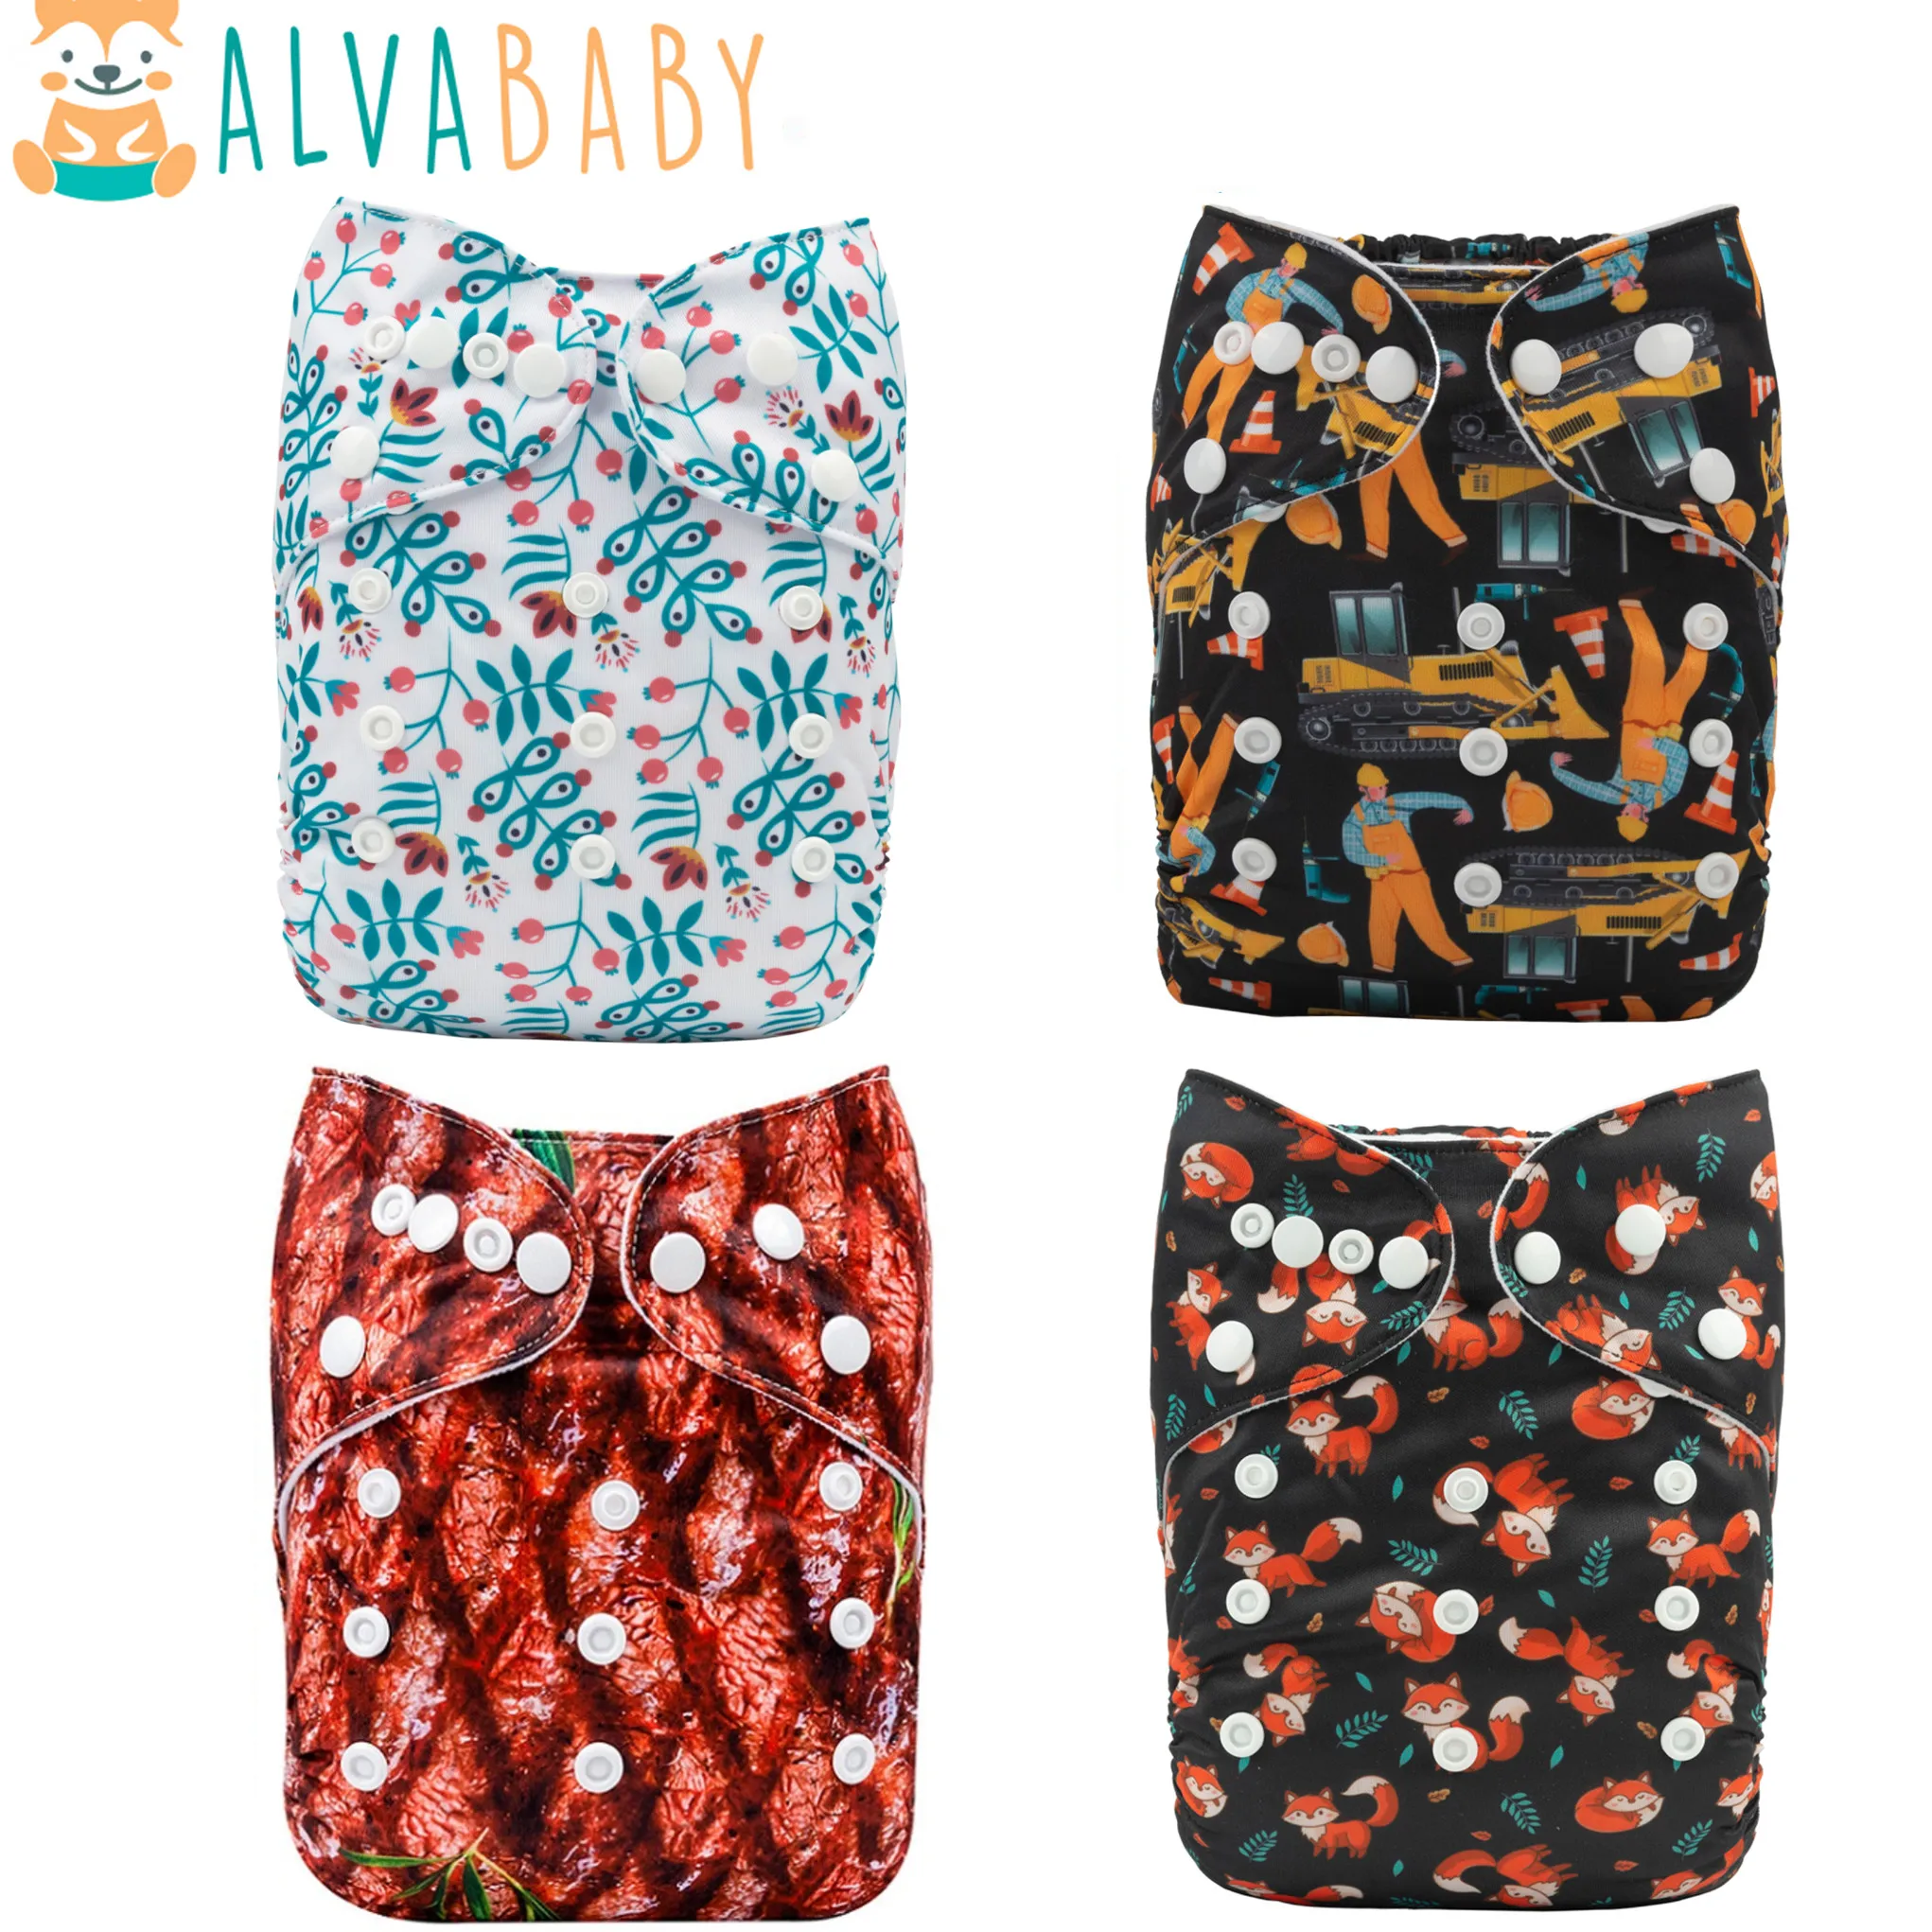 Insert U Pick ALVABABY One Size Reusable Washable Cloth Diapers Pocket Nappy 